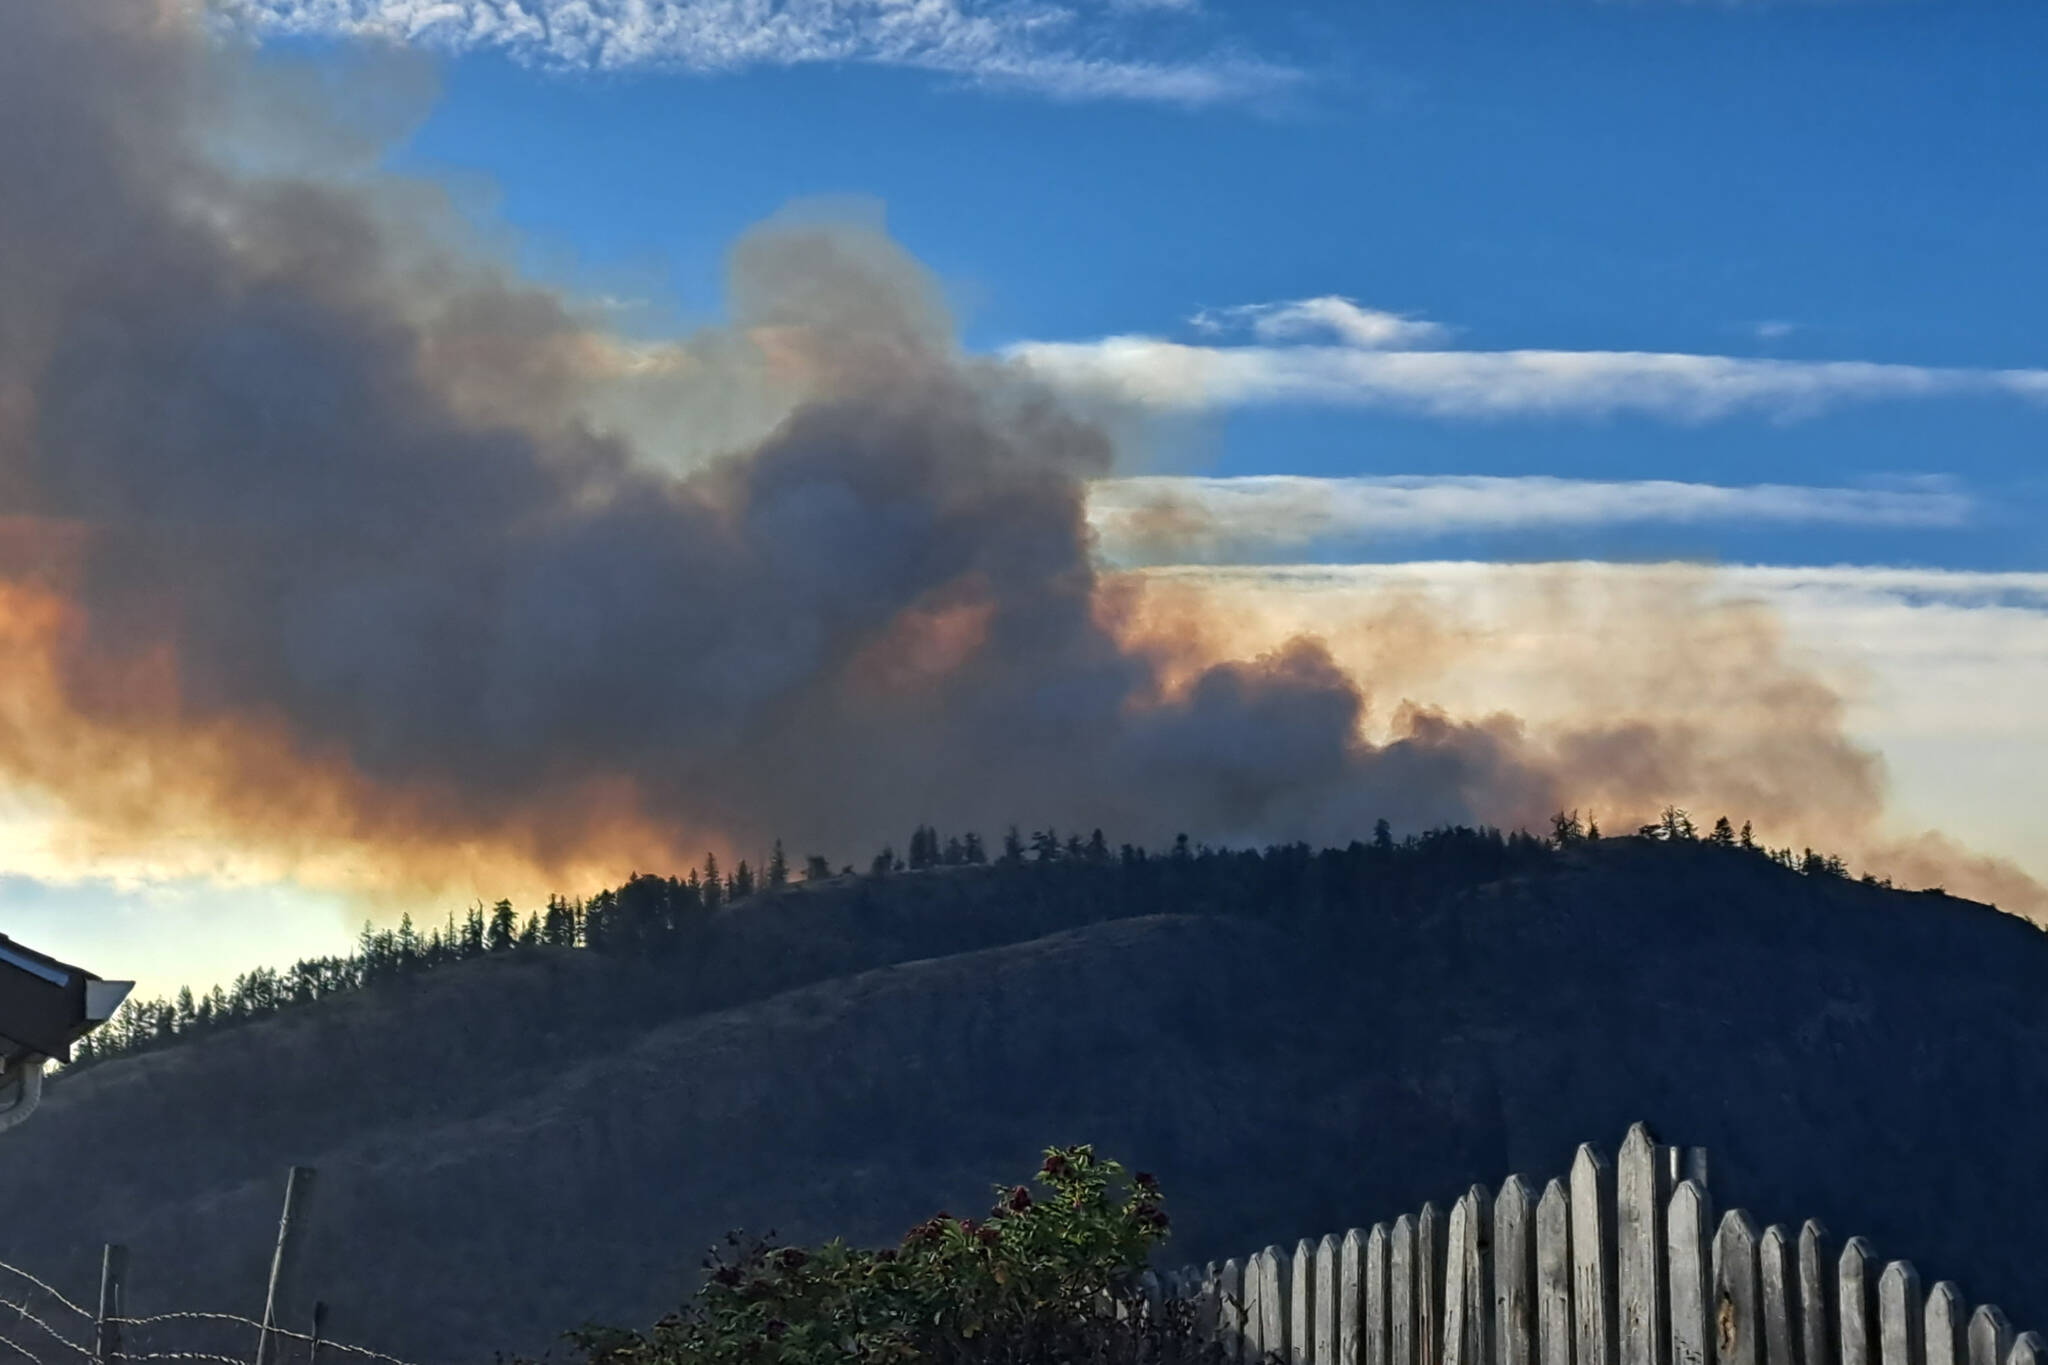 The fire near Twin Lakes has already led to evacuation orders for residents. (Penticton Western News)